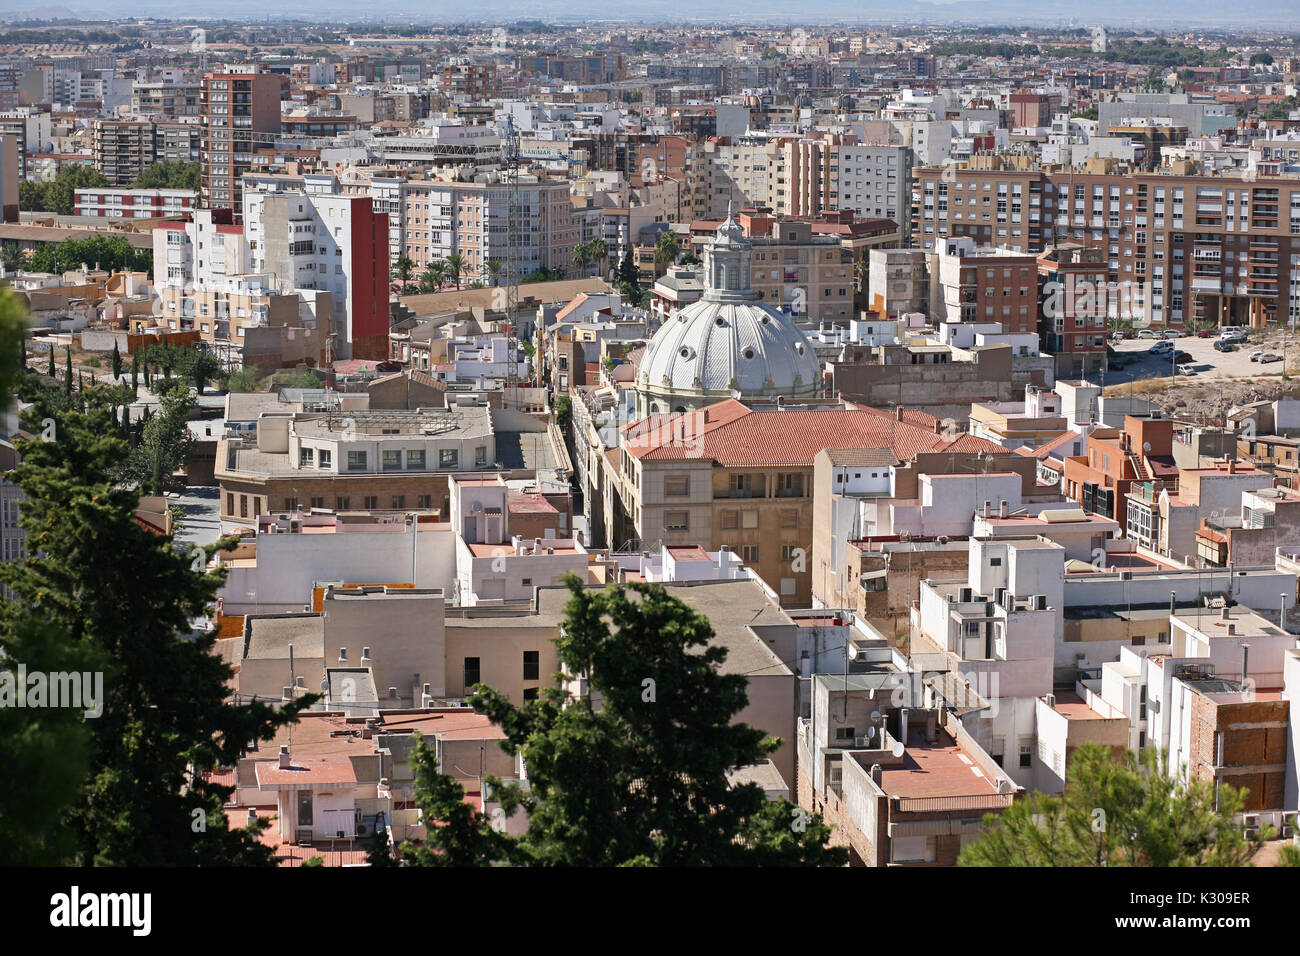 View of the city of Cartegena, Spain Stock Photo